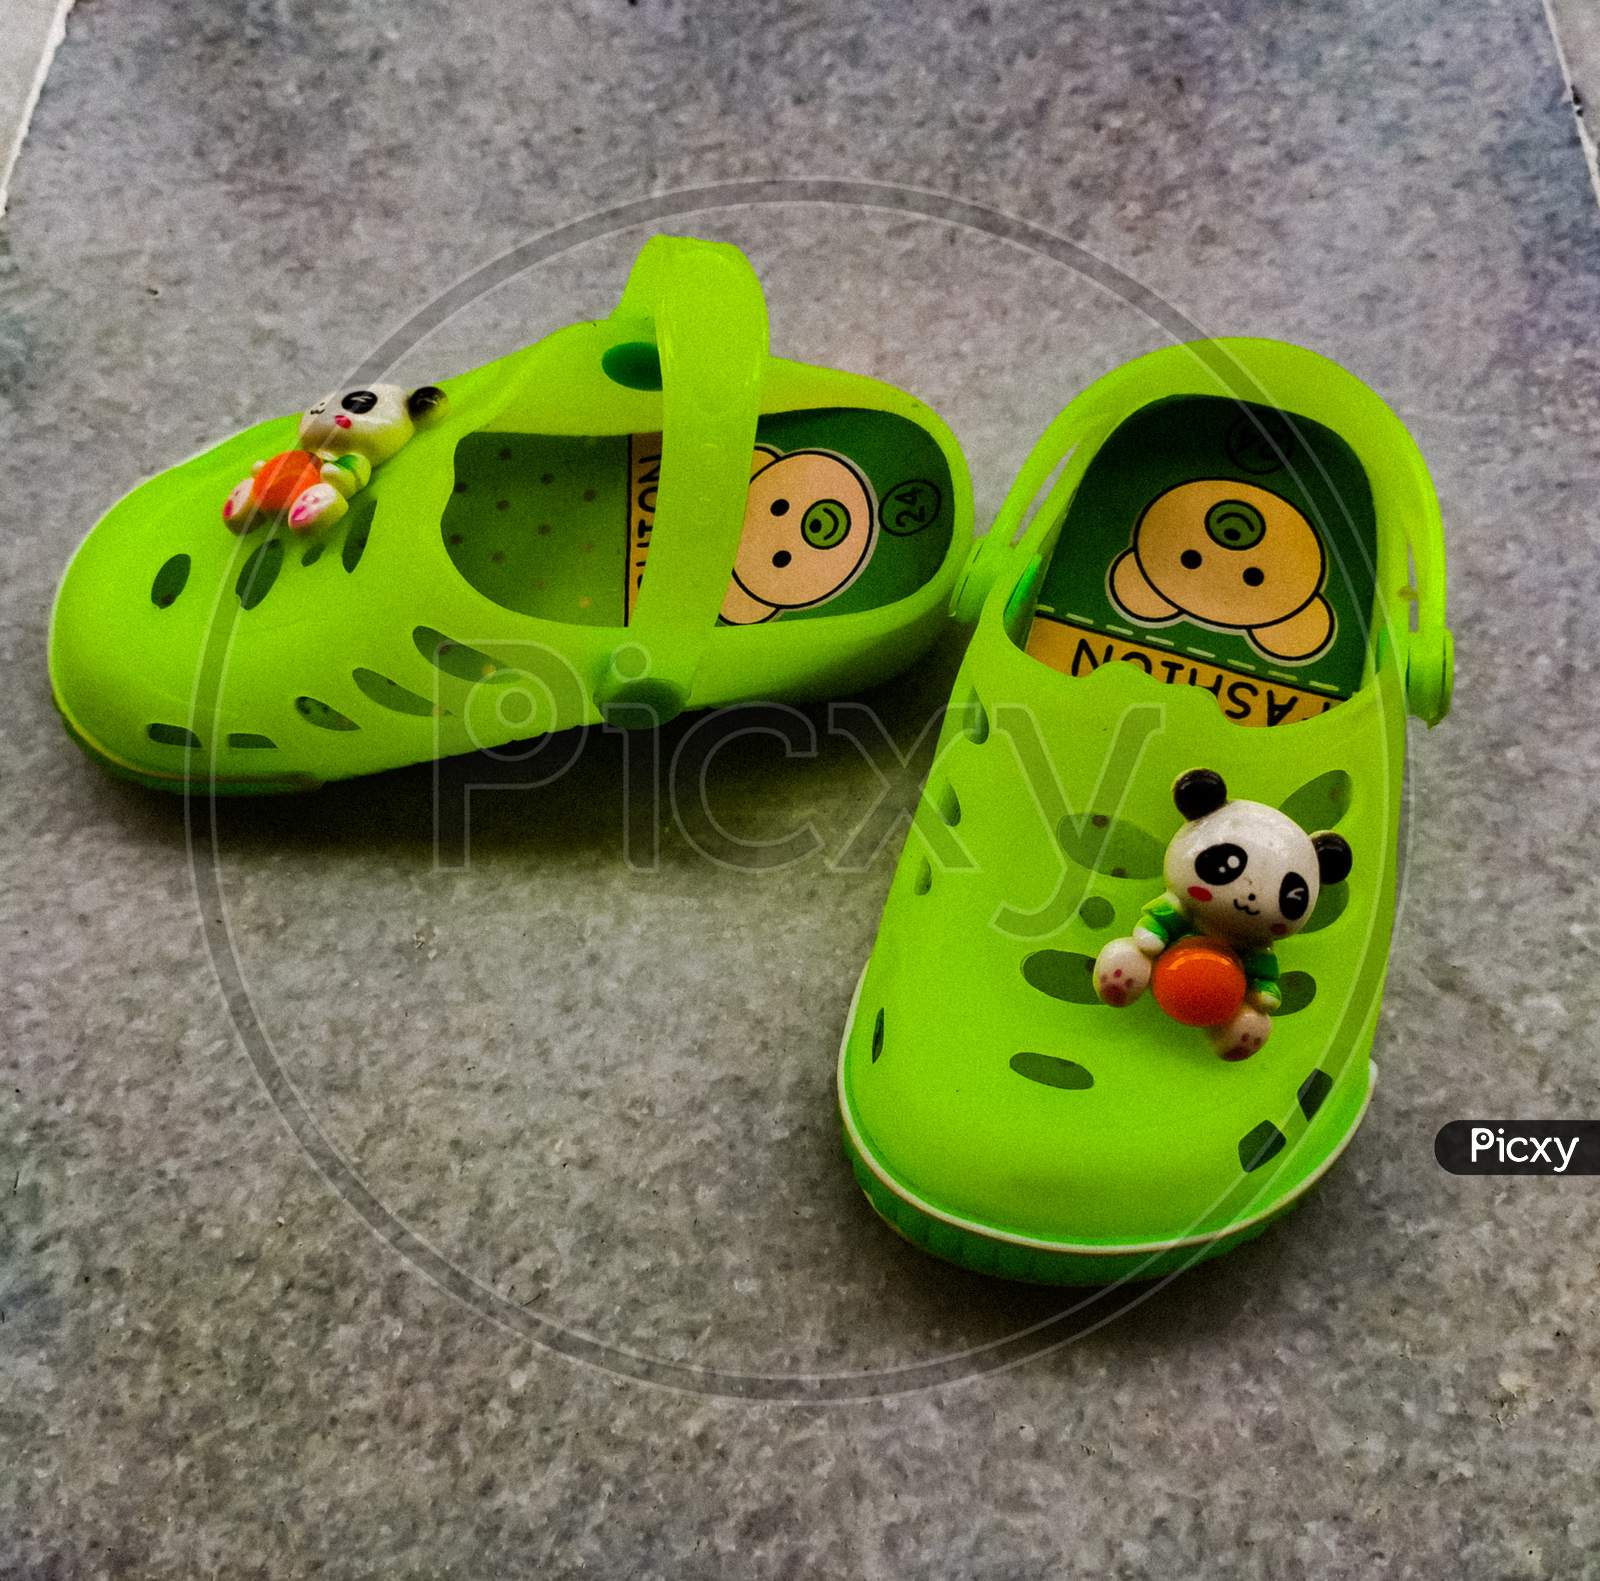 A vibrant green coloured pair of footwear of a baby.